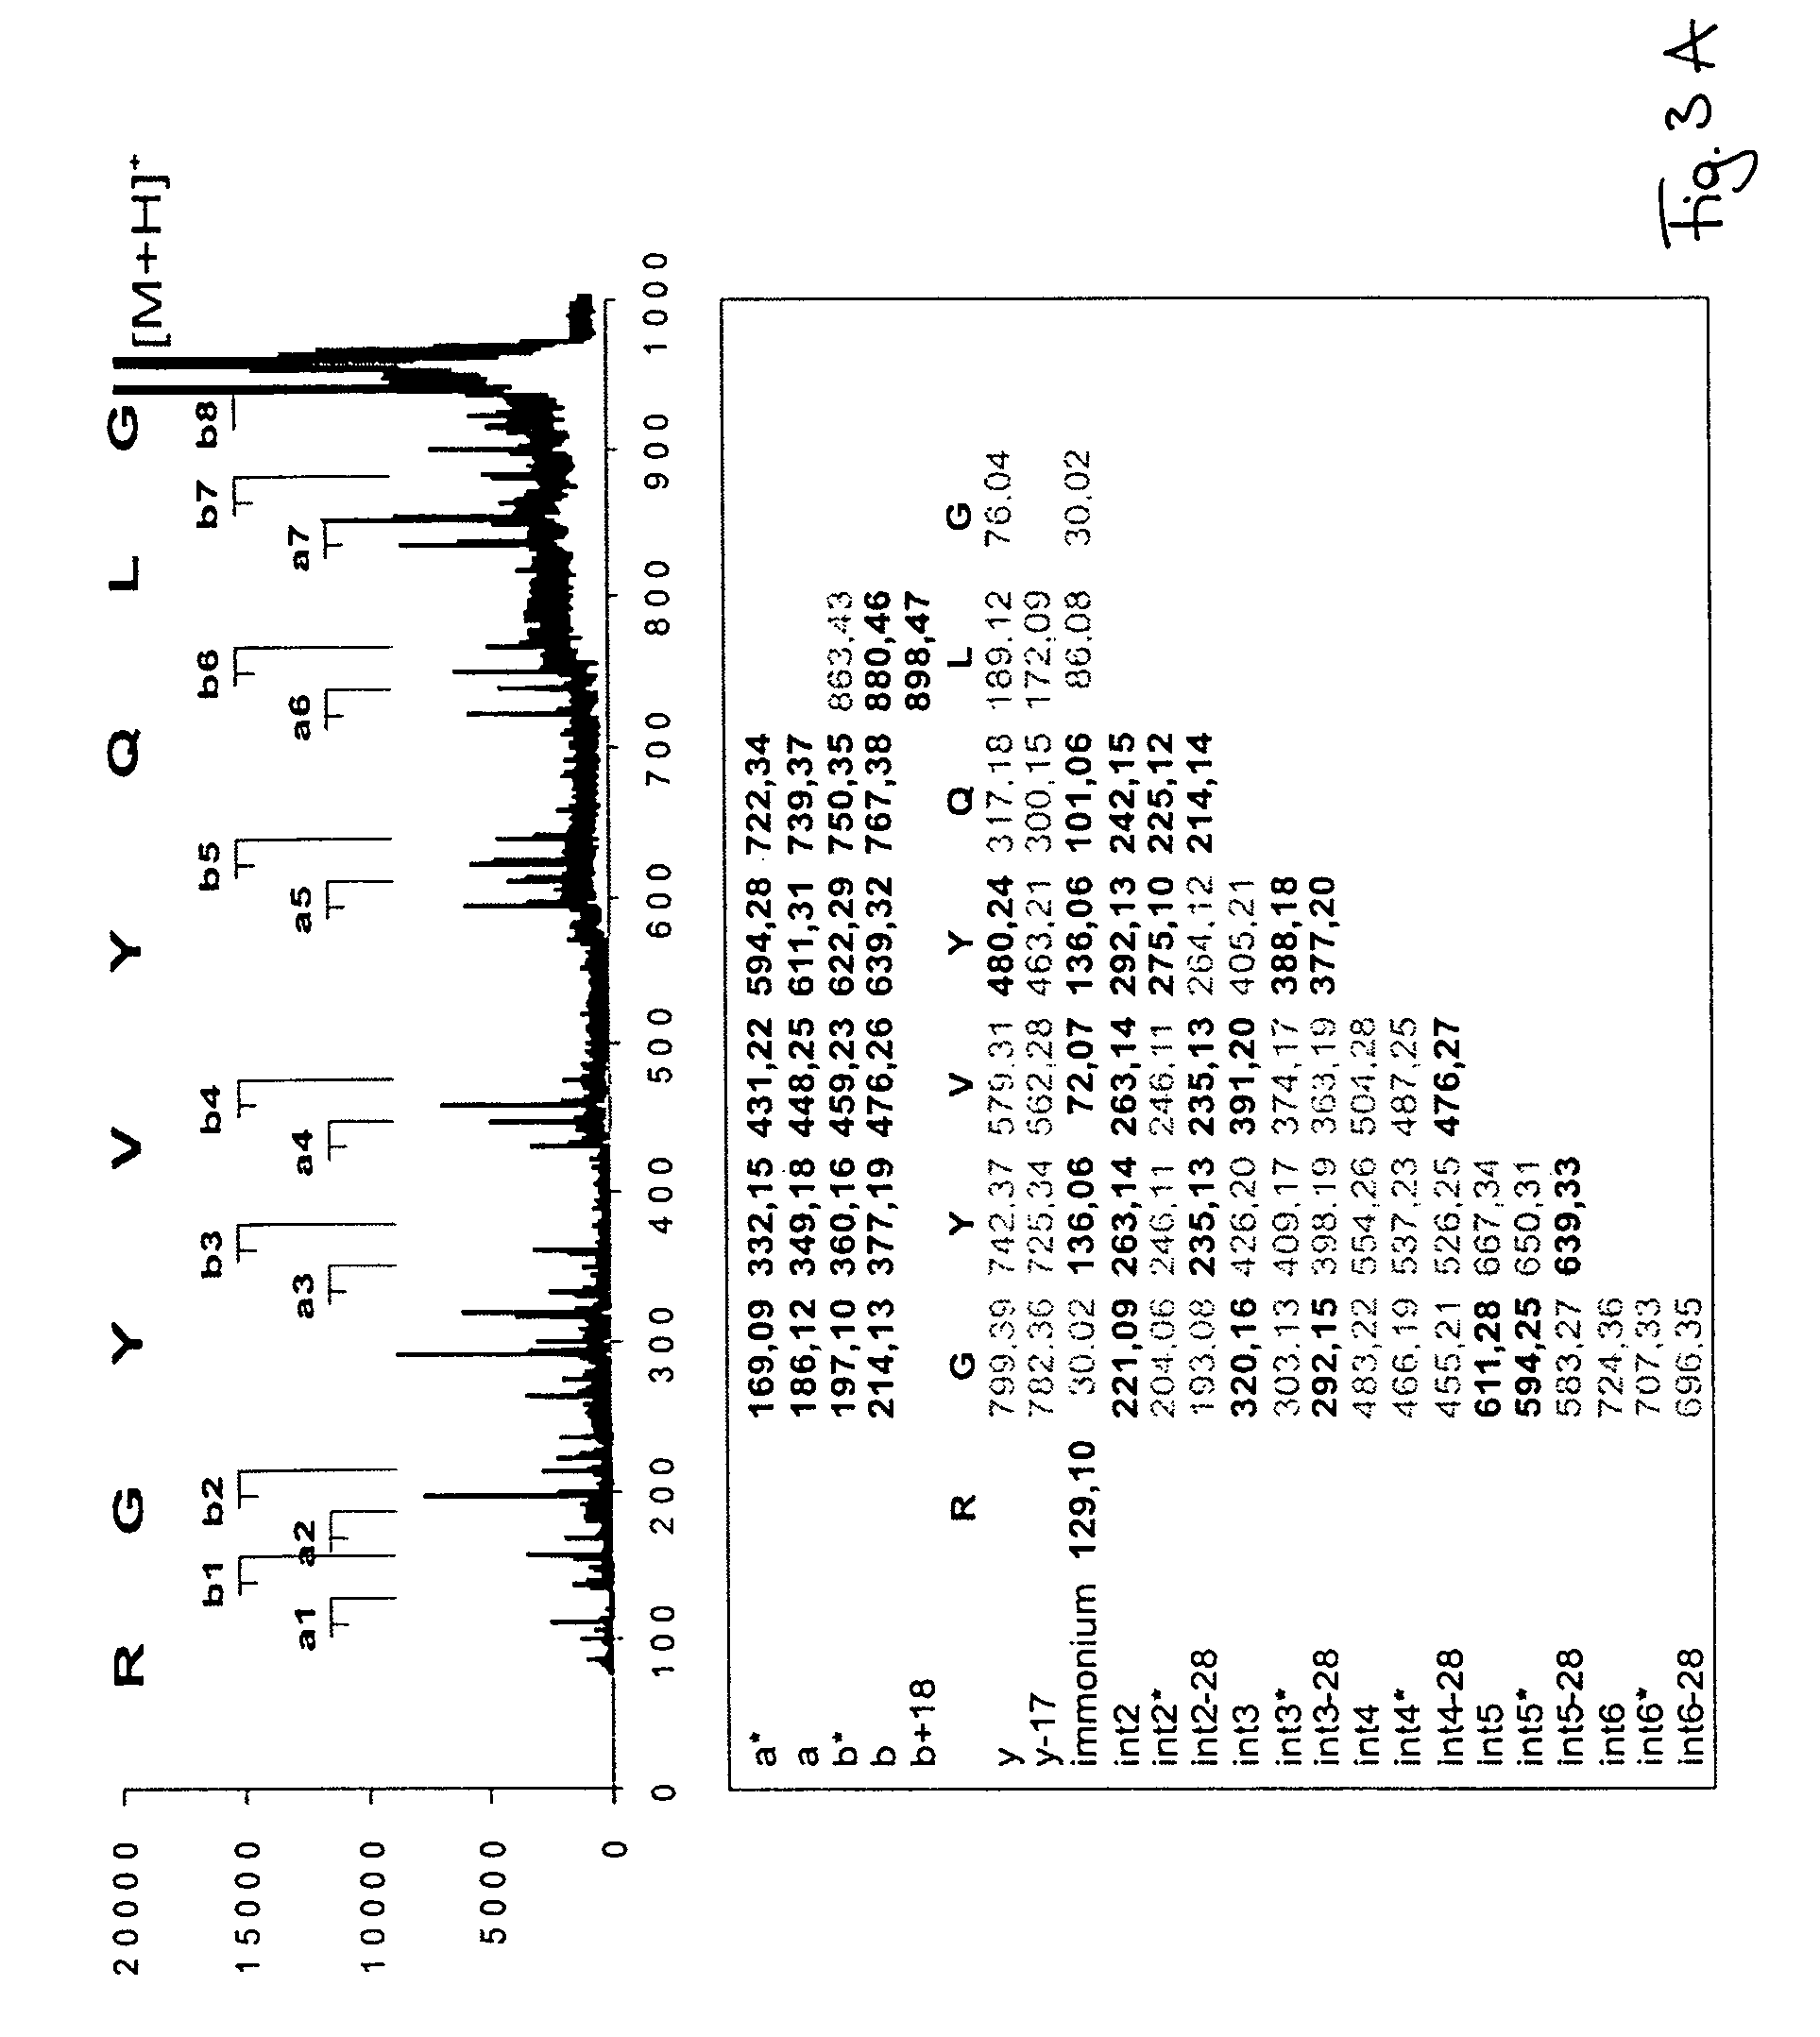 Peptide sequencing from peptide fragmentation mass spectra